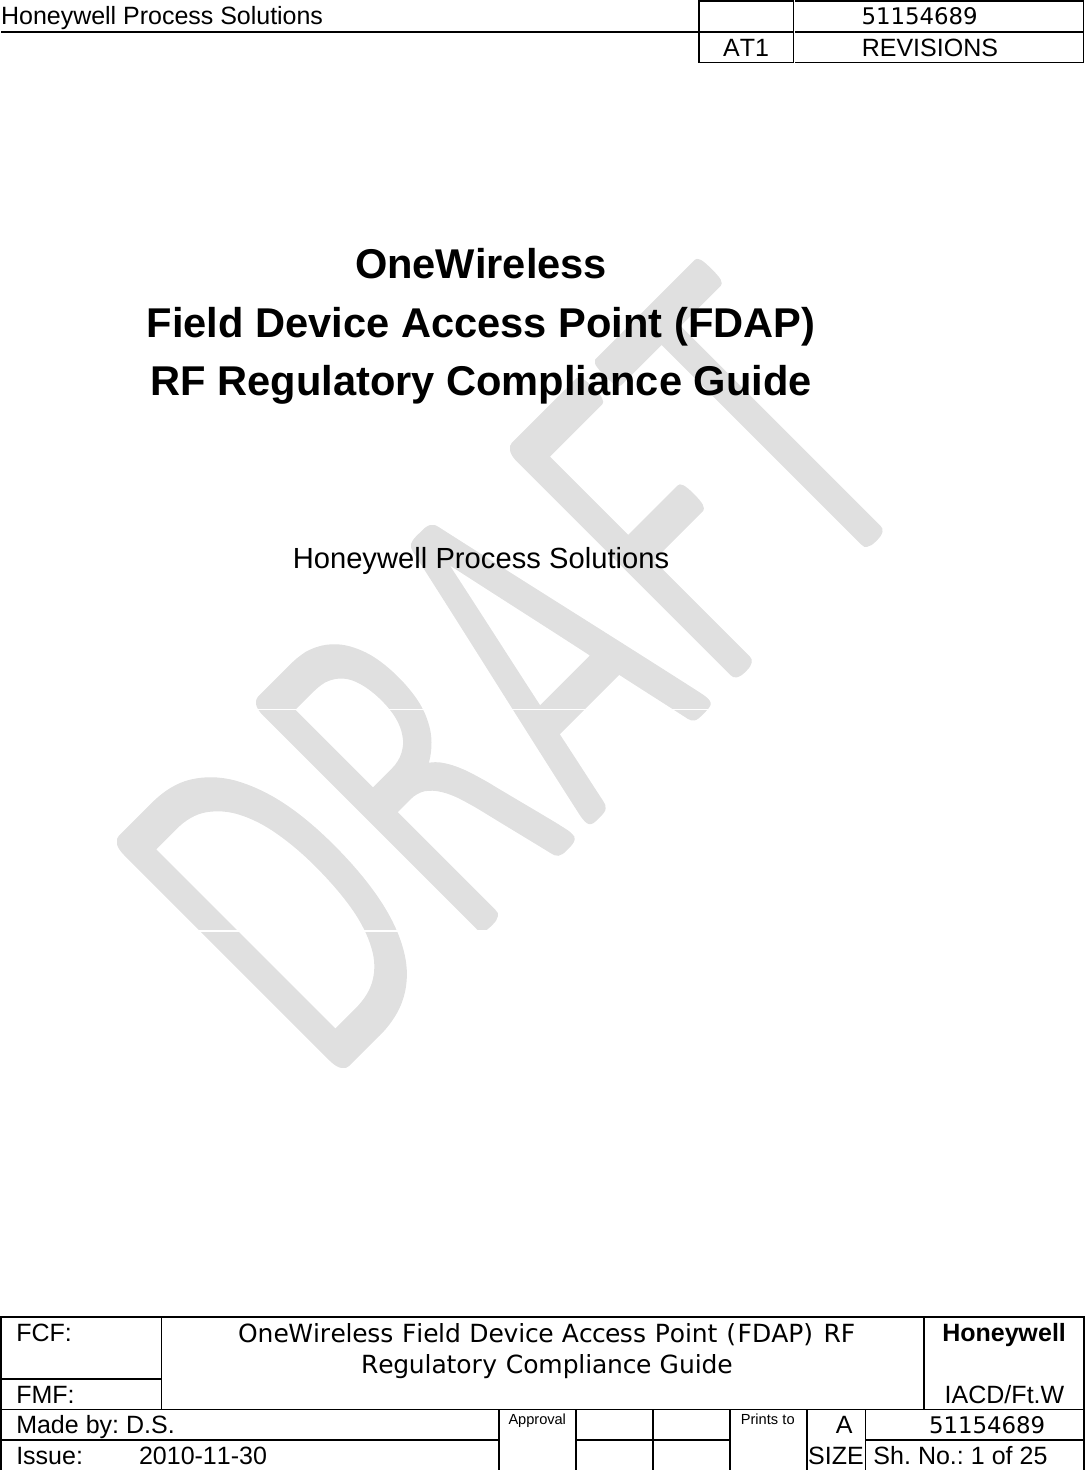 Honeywell Process Solutions              51154689   AT1           REVISIONS  FCF:  OneWireless Field Device Access Point (FDAP) RF Regulatory Compliance Guide Honeywell FMF:               IACD/Ft.W Made by: D.S.   Approval   Prints to     A           51154689 Issue:        2010-11-30          SIZE  Sh. No.: 1 of 25      OneWireless  Field Device Access Point (FDAP)   RF Regulatory Compliance Guide       Honeywell Process Solutions    